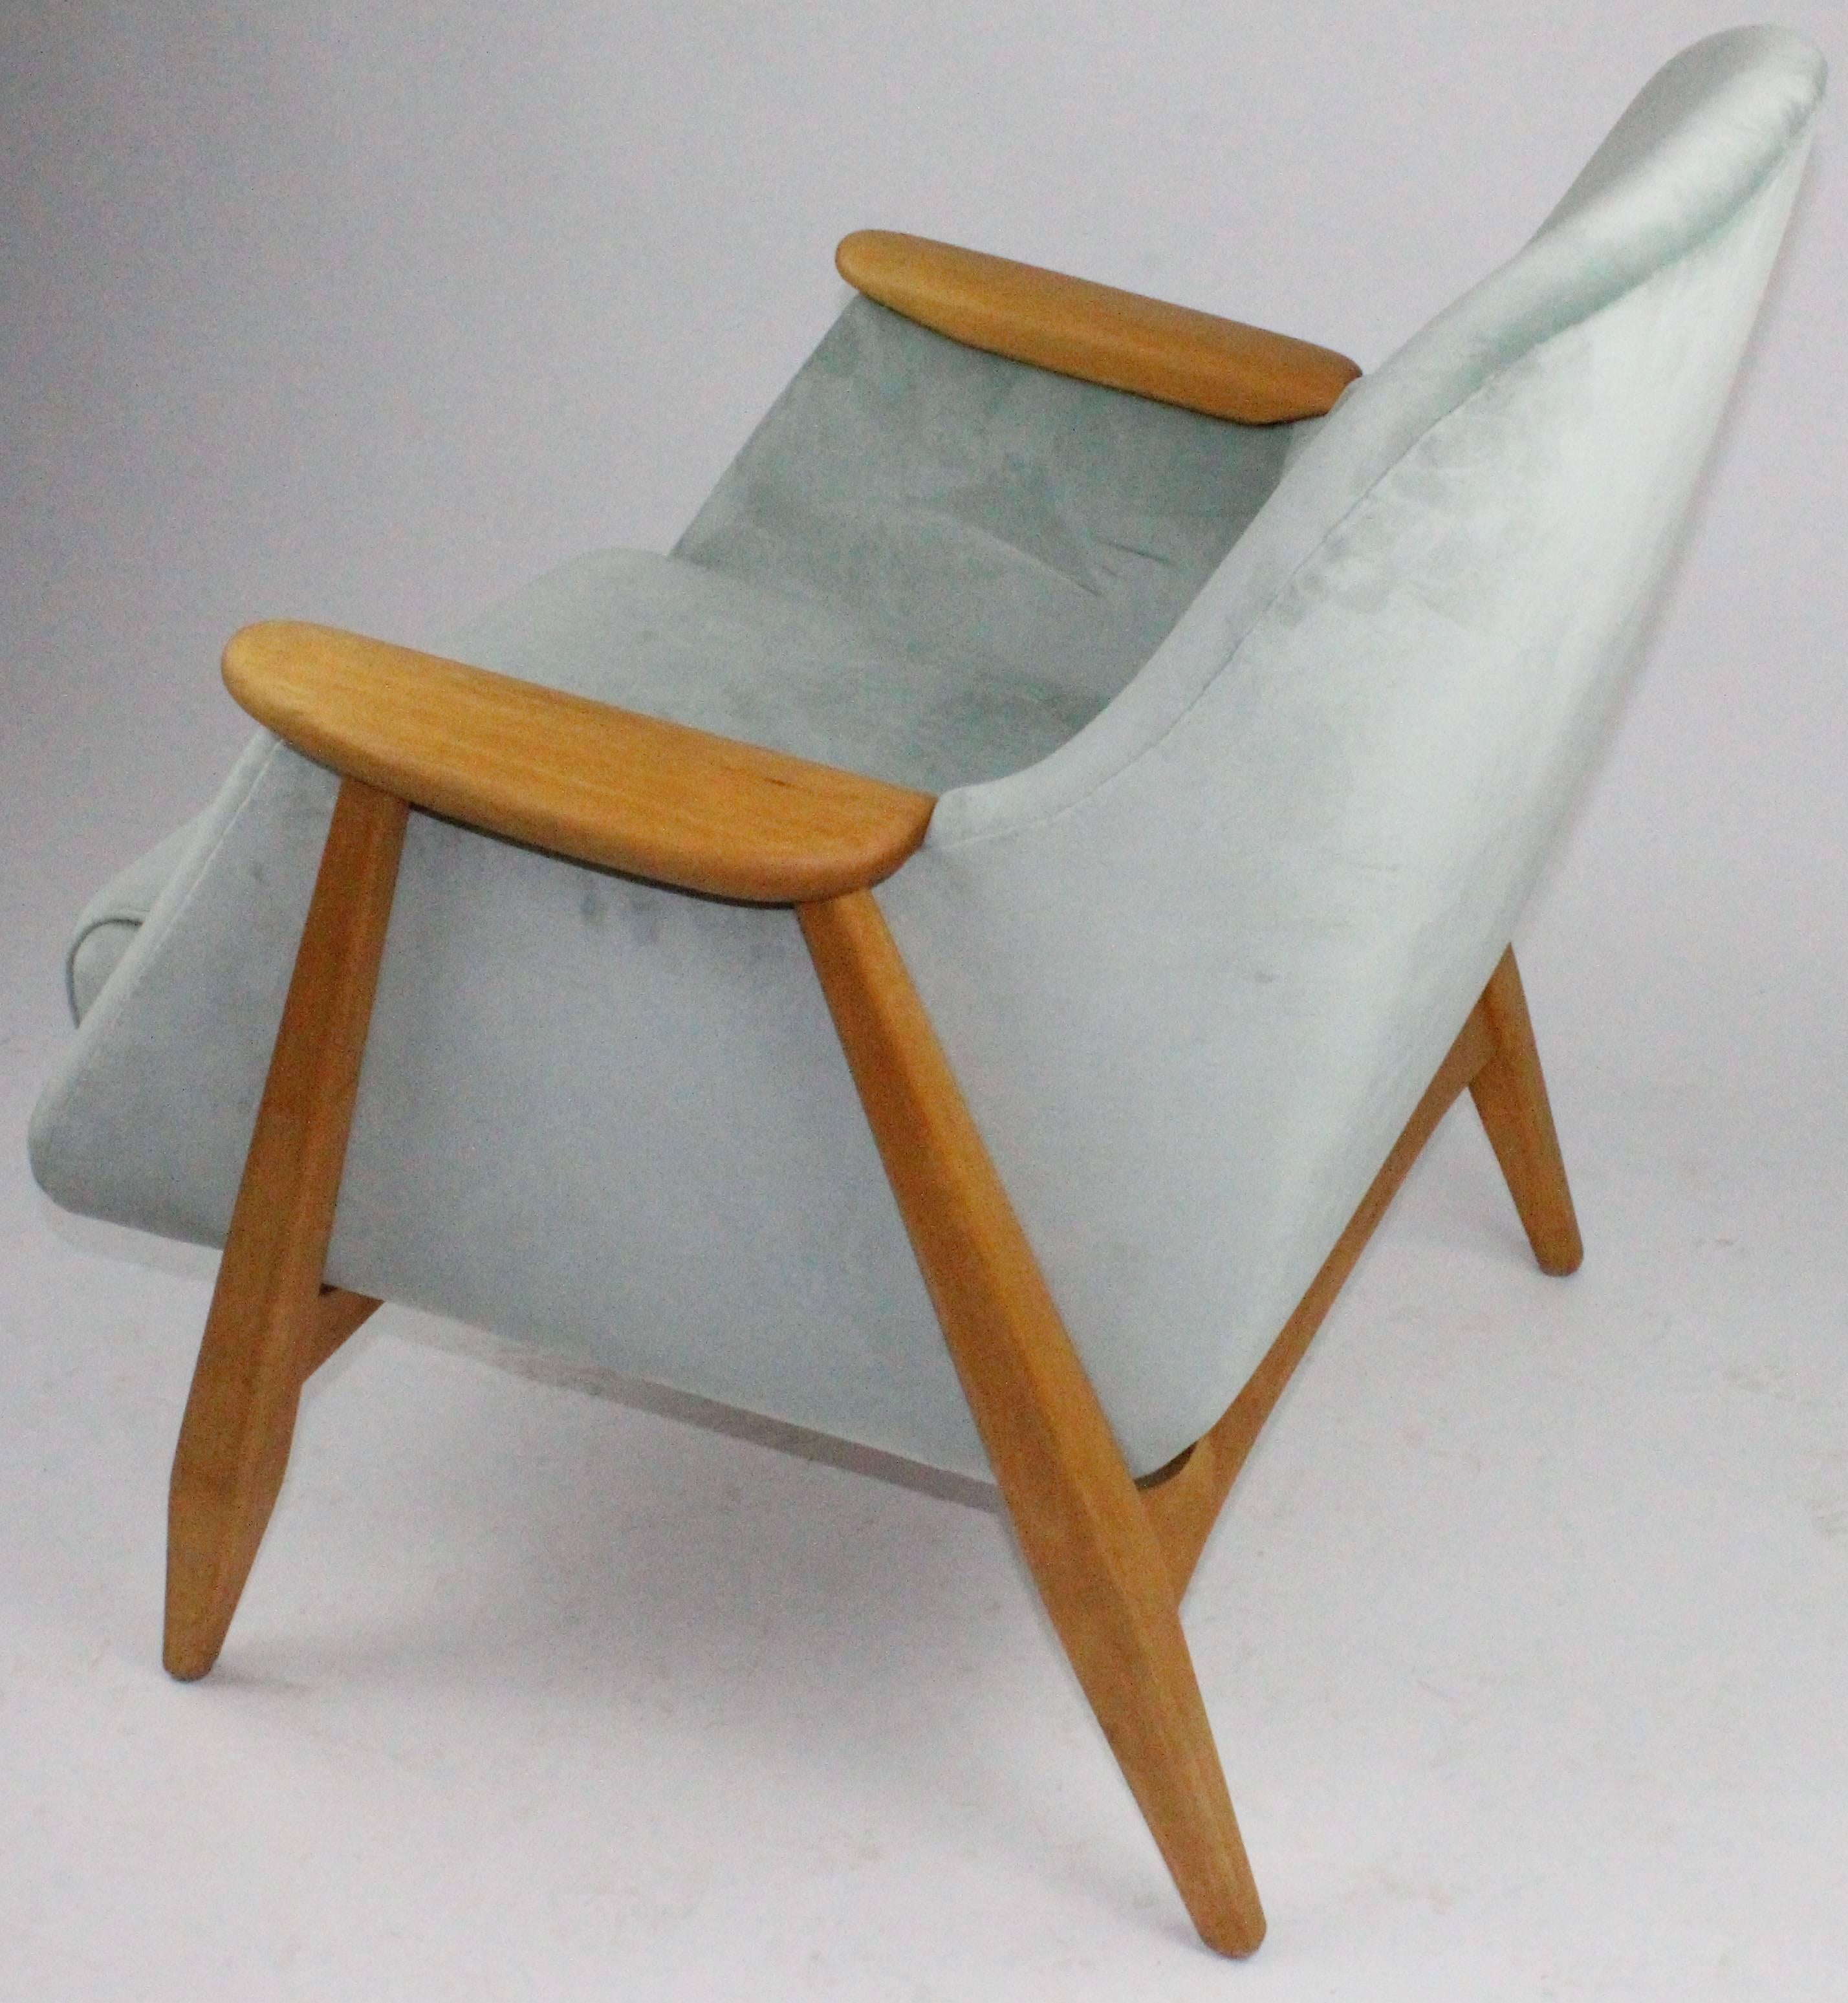 20th Century Svante Skogh Chair with Stool for Asko Finland, Design 1954 For Sale